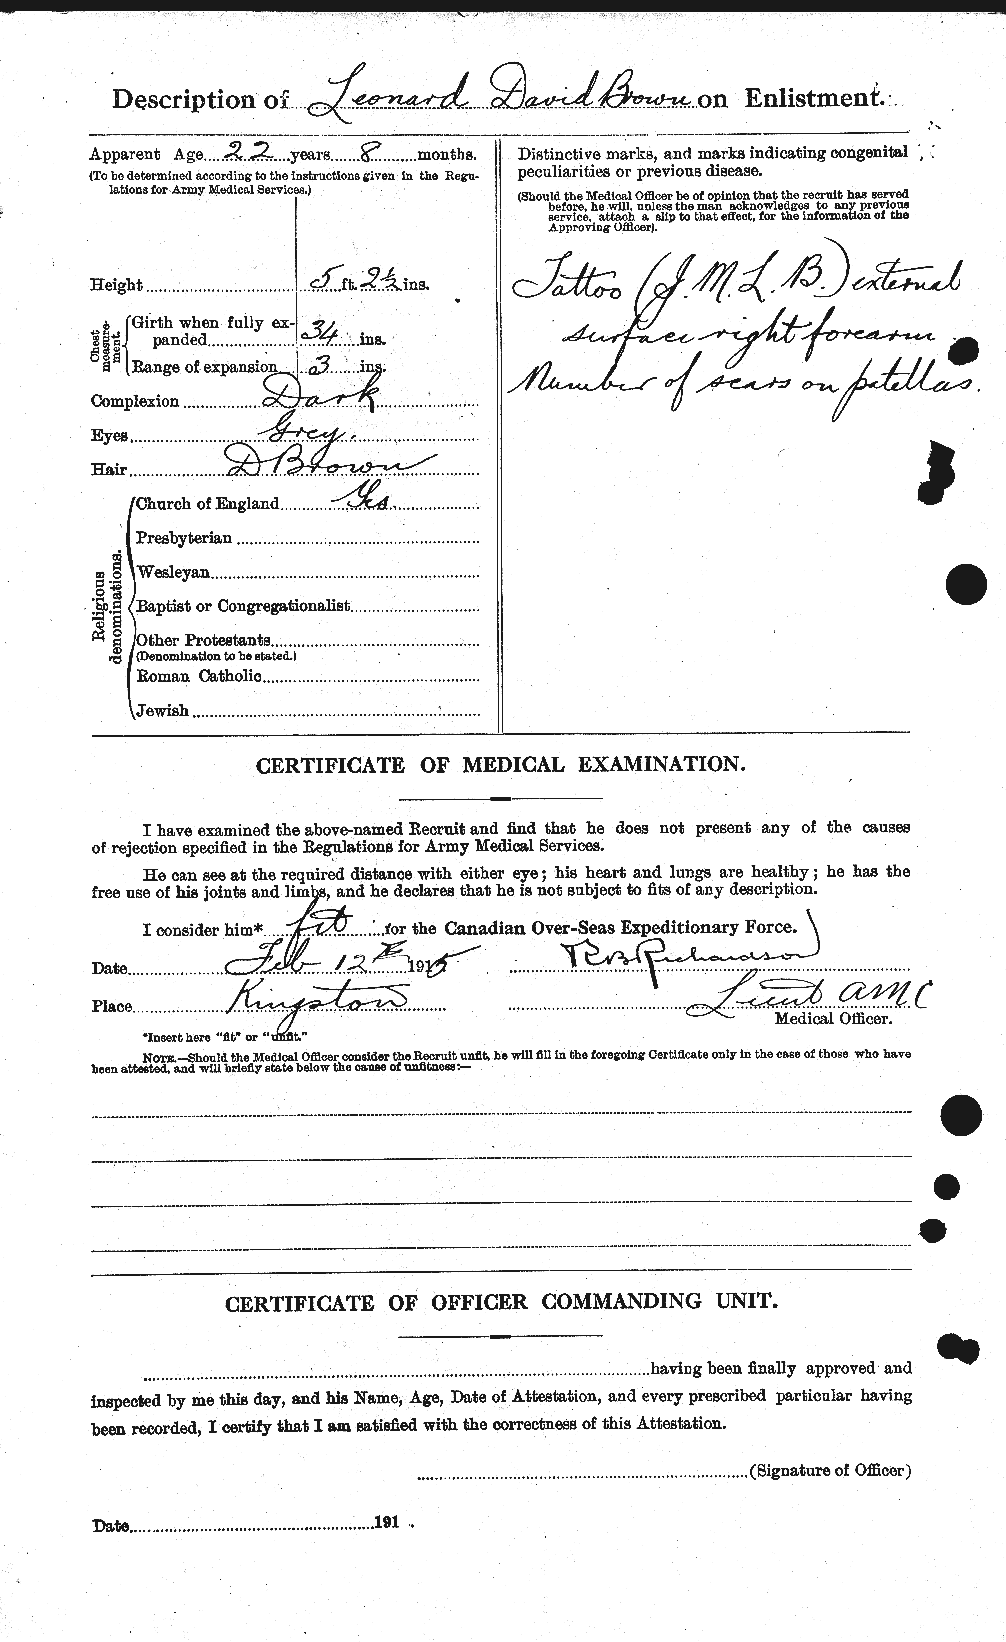 Personnel Records of the First World War - CEF 266294b